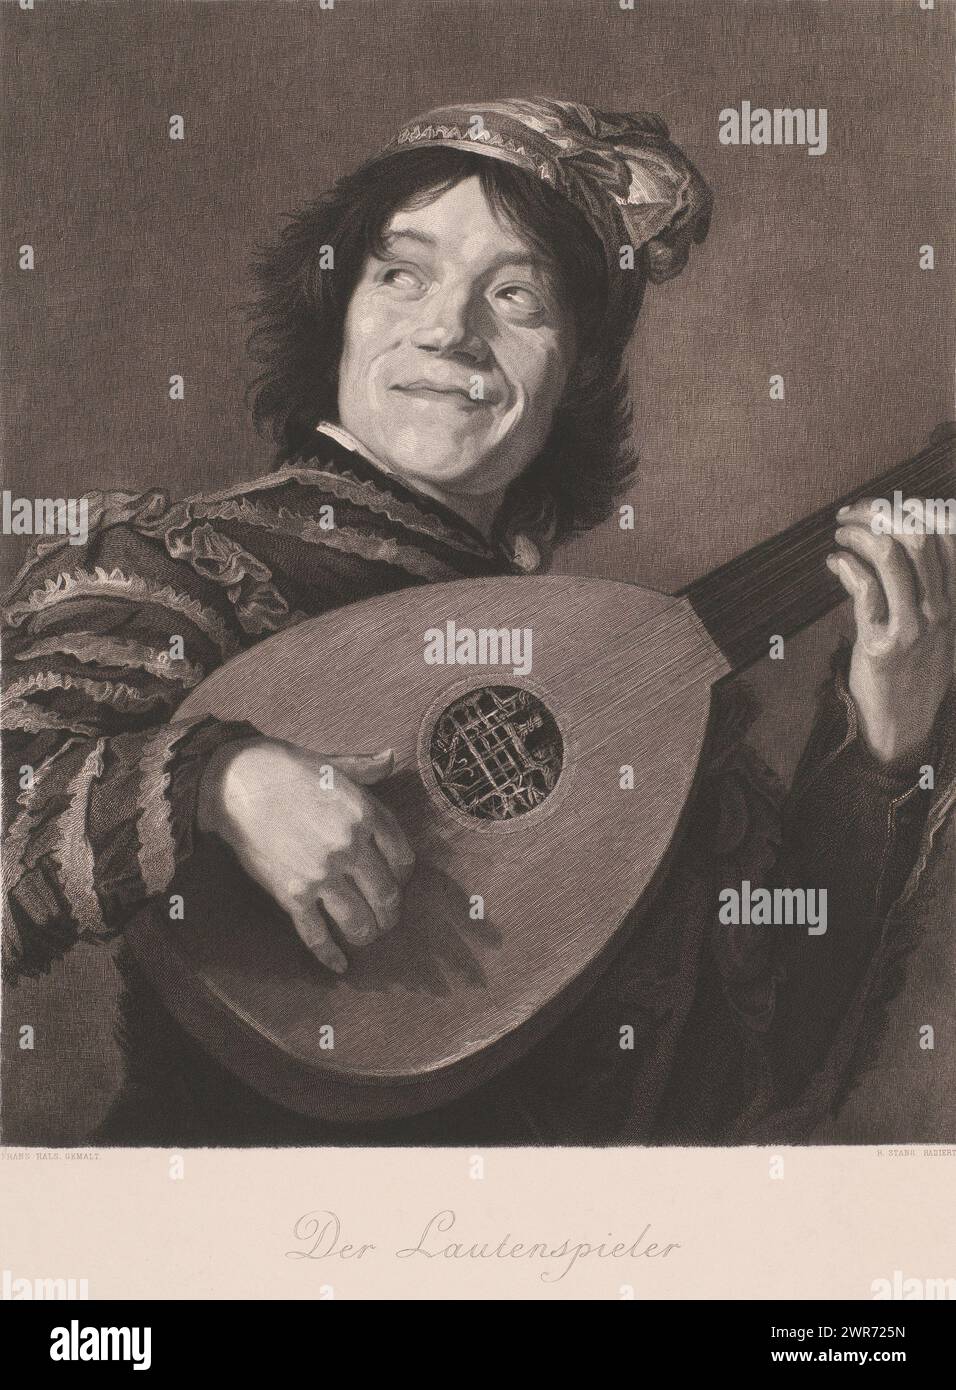 Lute player, Der Lautenspieler (title on object), print maker: Rudolf Stang, after painting by: Frans Hals, publisher: Stiefbold & Co., publisher: Berlin, printer: Haarlem, 1841 - 1891, paper, etching, height 478 mm × width 392 mm, print Stock Photo